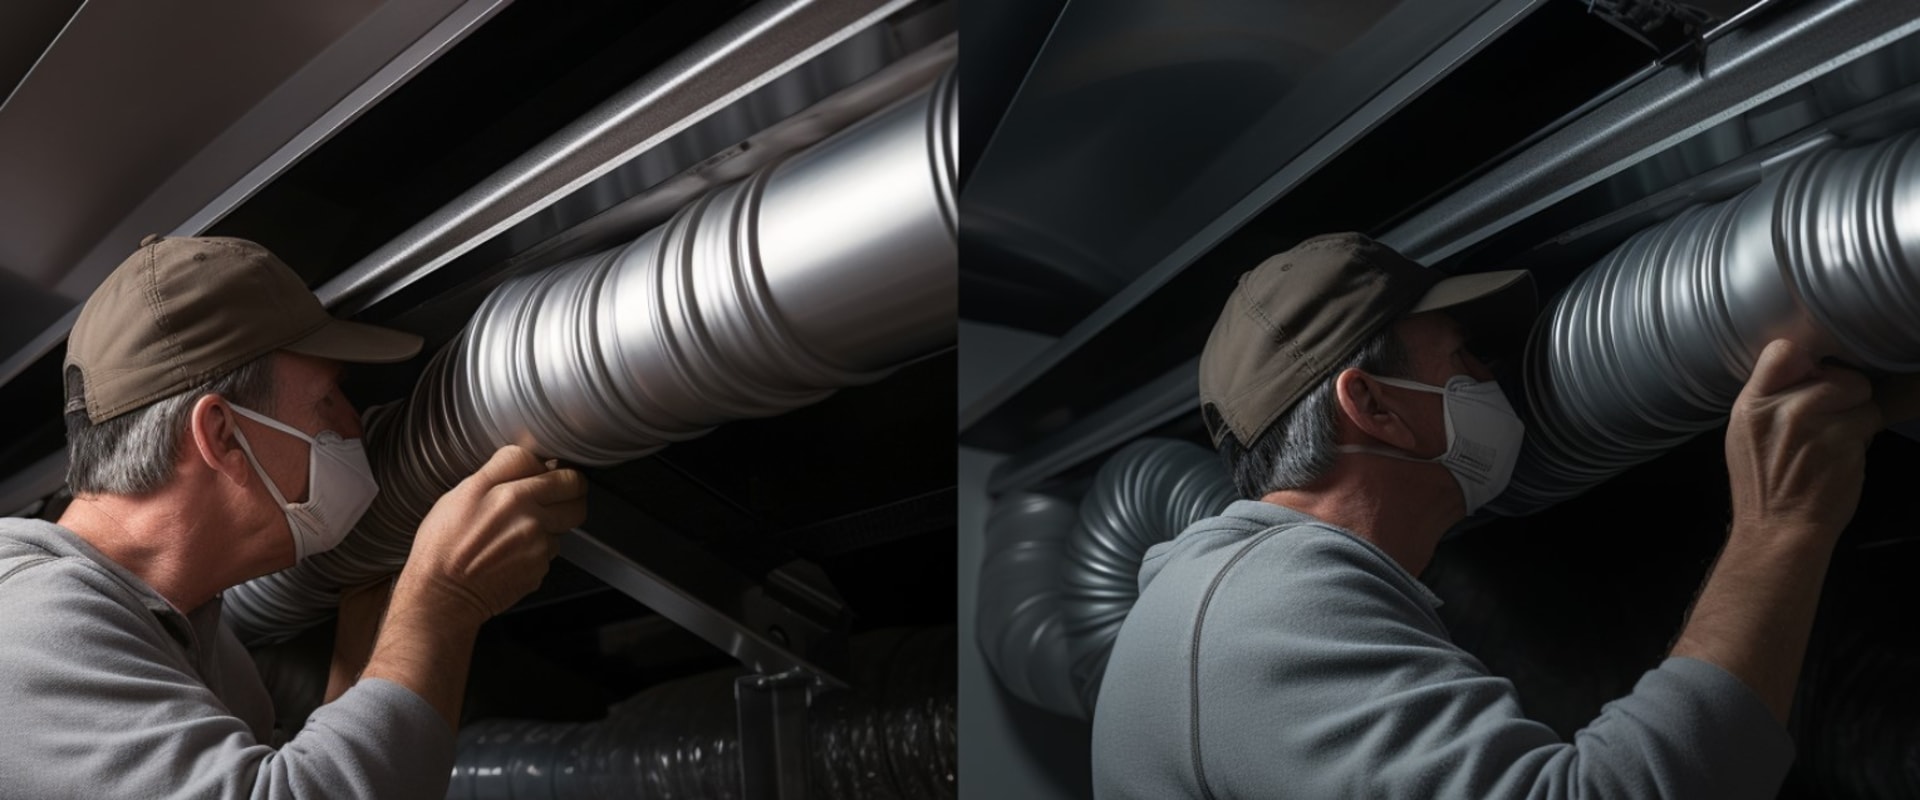 Reliable Air Duct Sealing Services in Riviera Beach FL